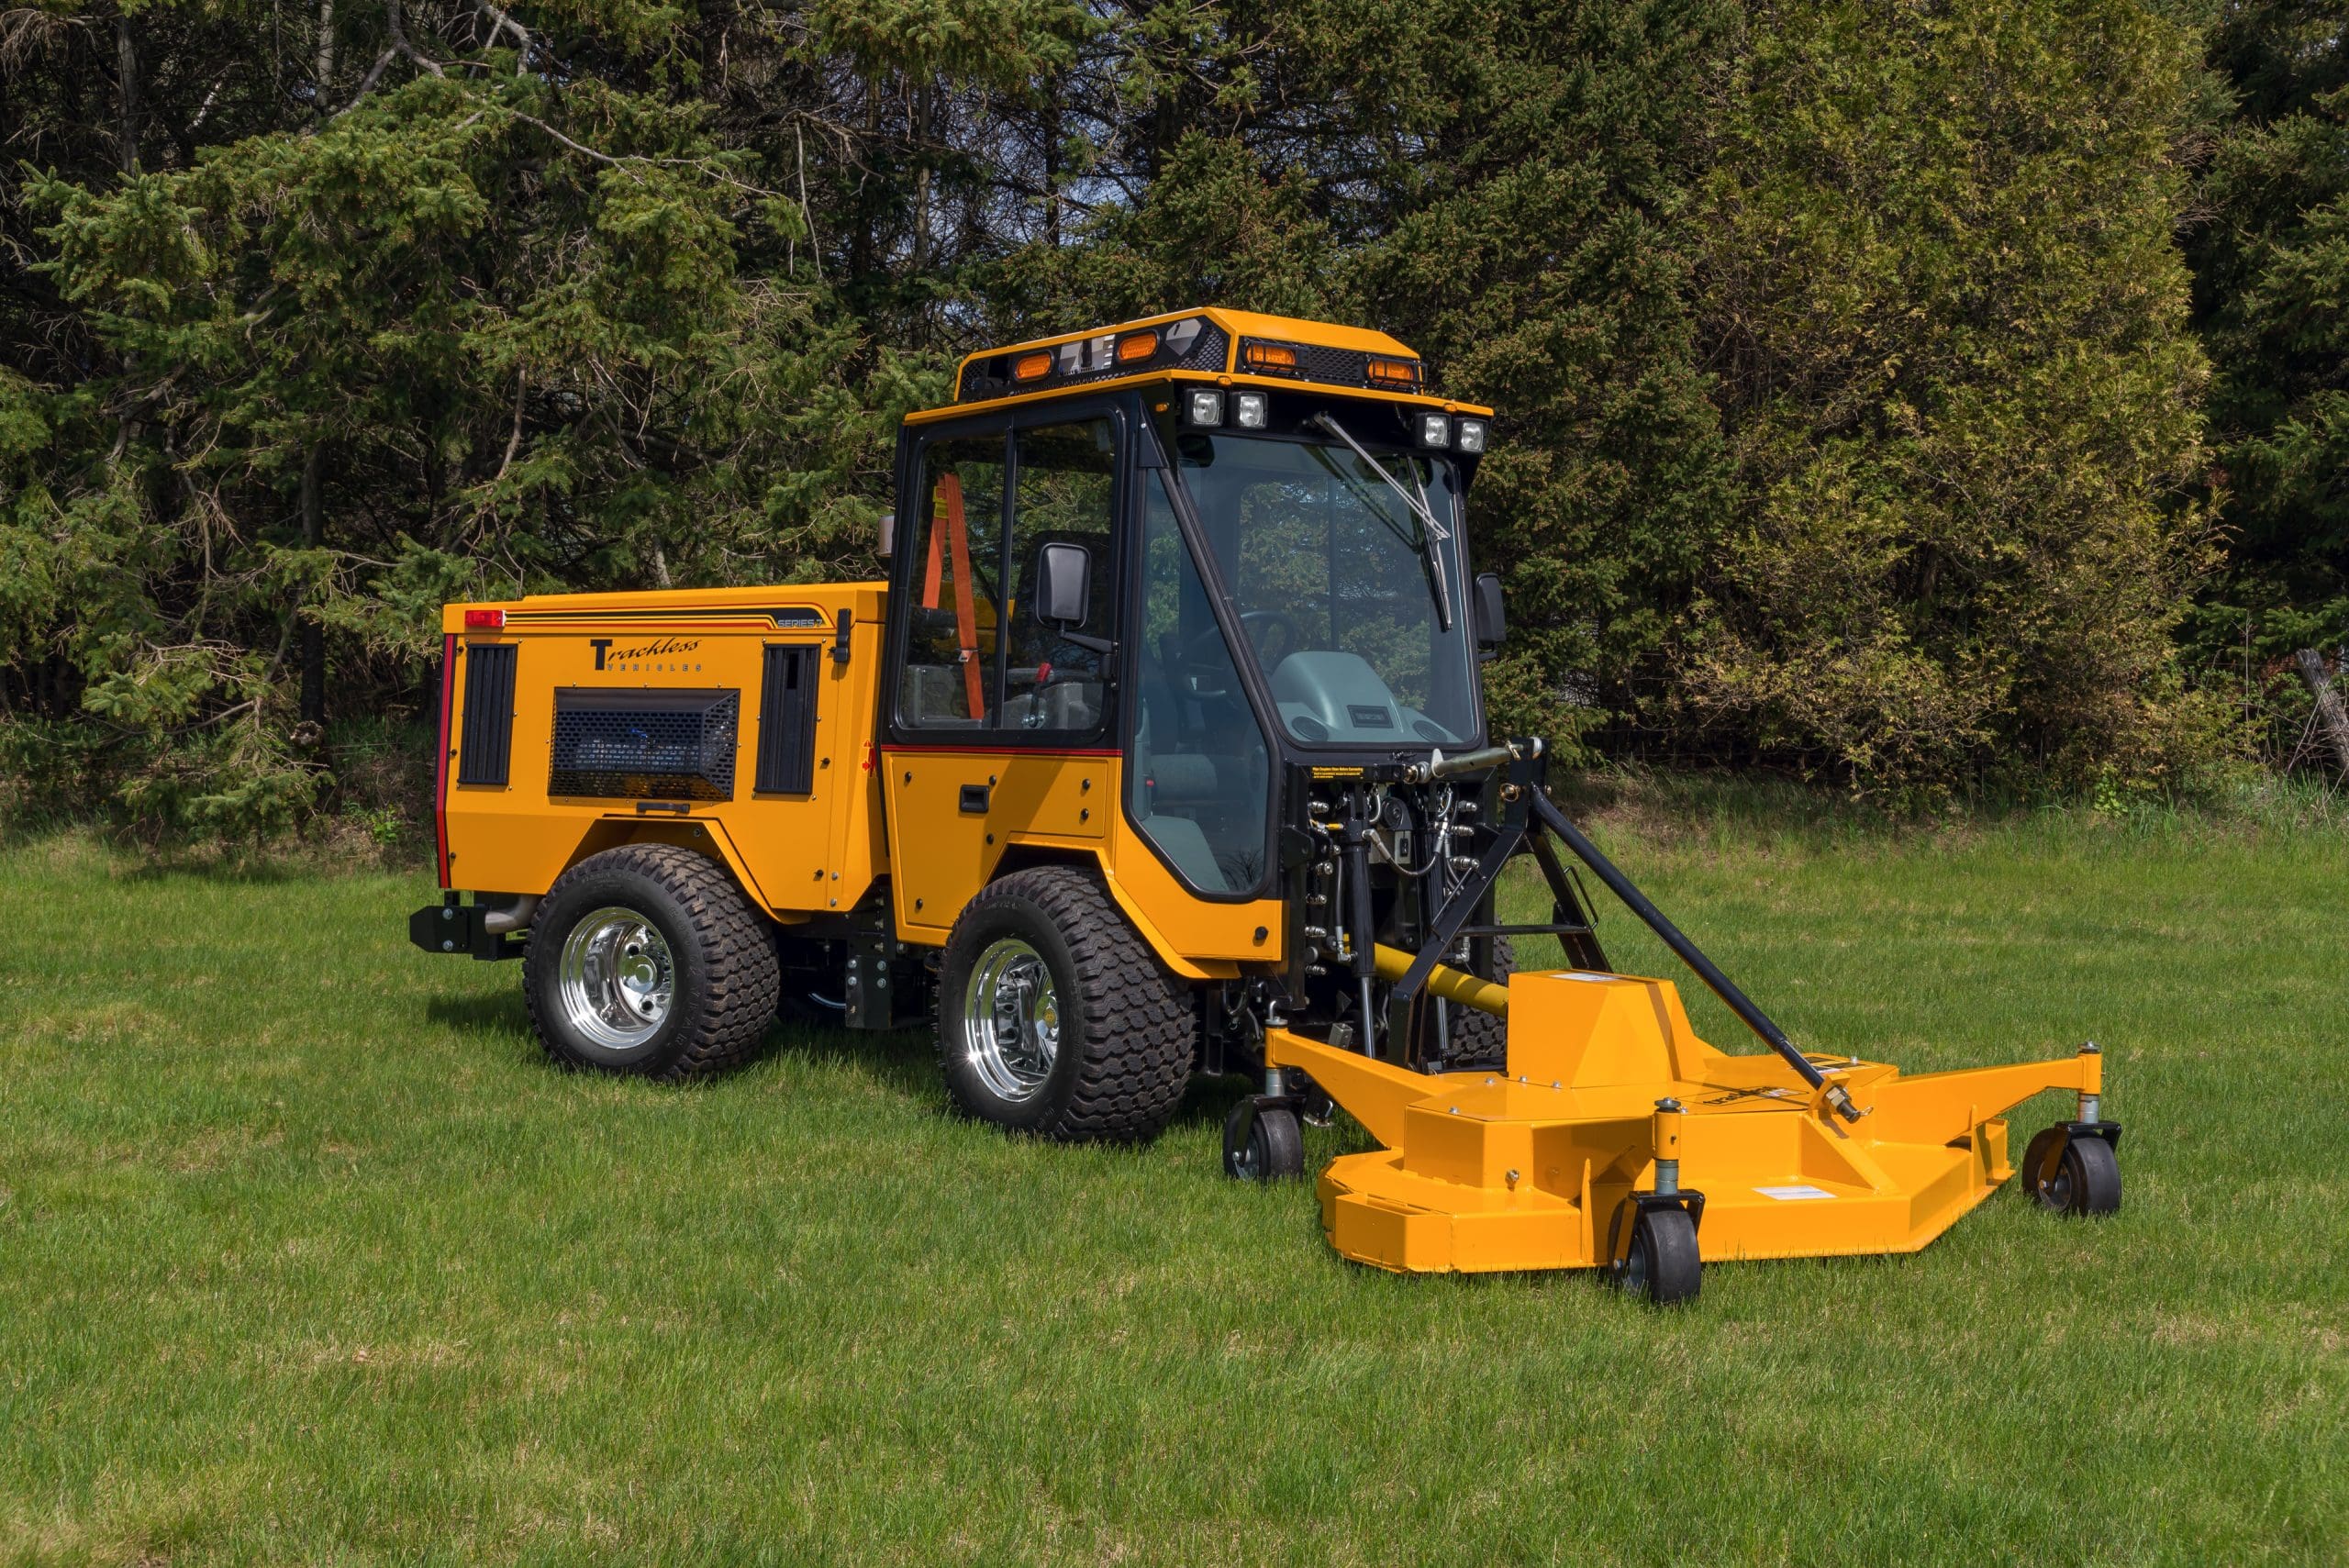 trackless vehicles rotary finishing mower 6' attachment on sidewalk municipal tractor